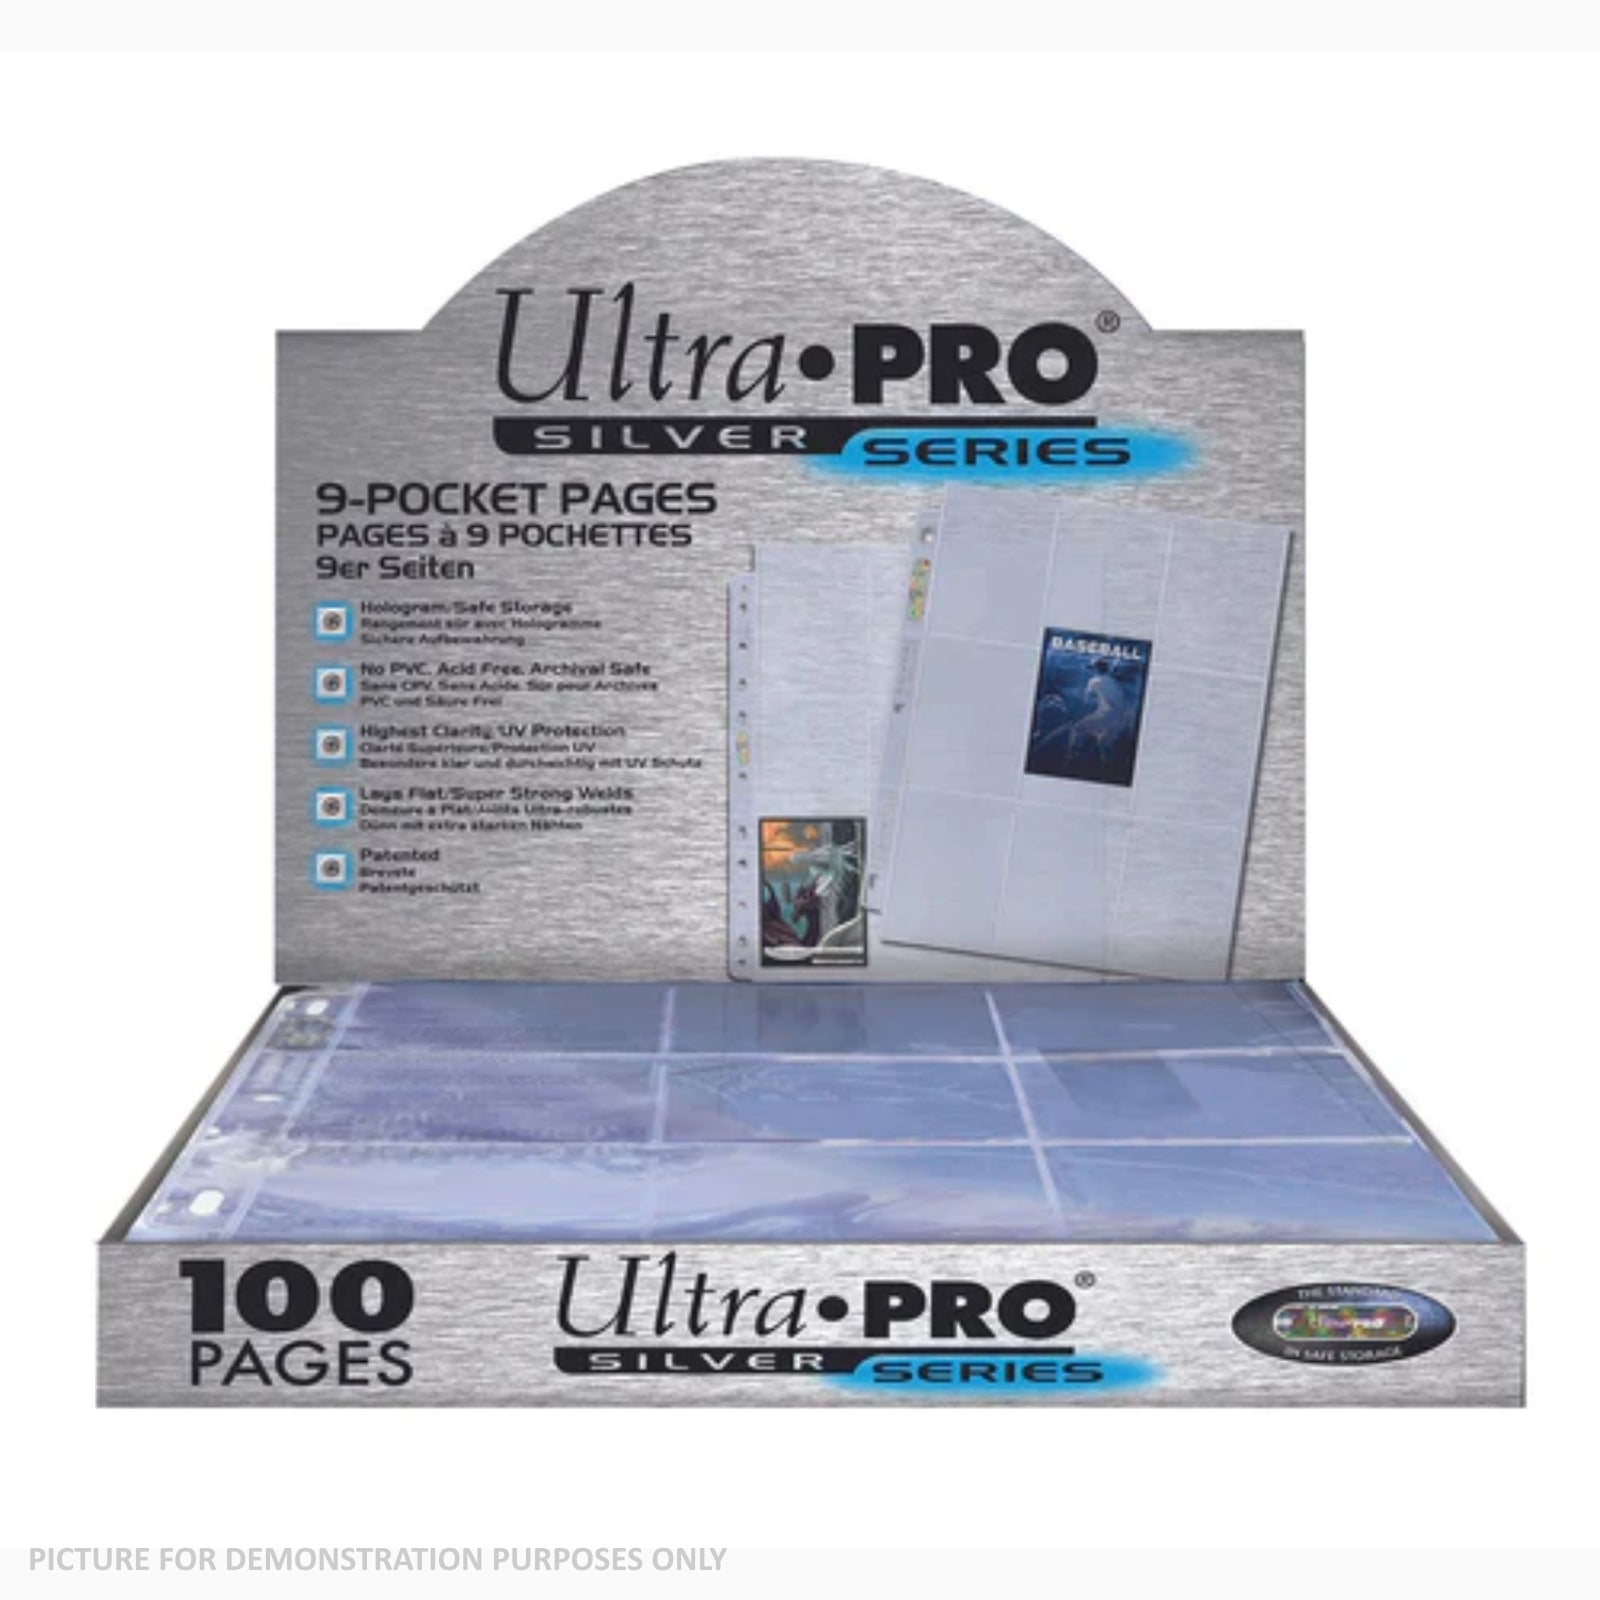 Ultra Pro SILVER SERIES 9 Pocket Trading Card Pages - Tray of 100 or Case of 1000